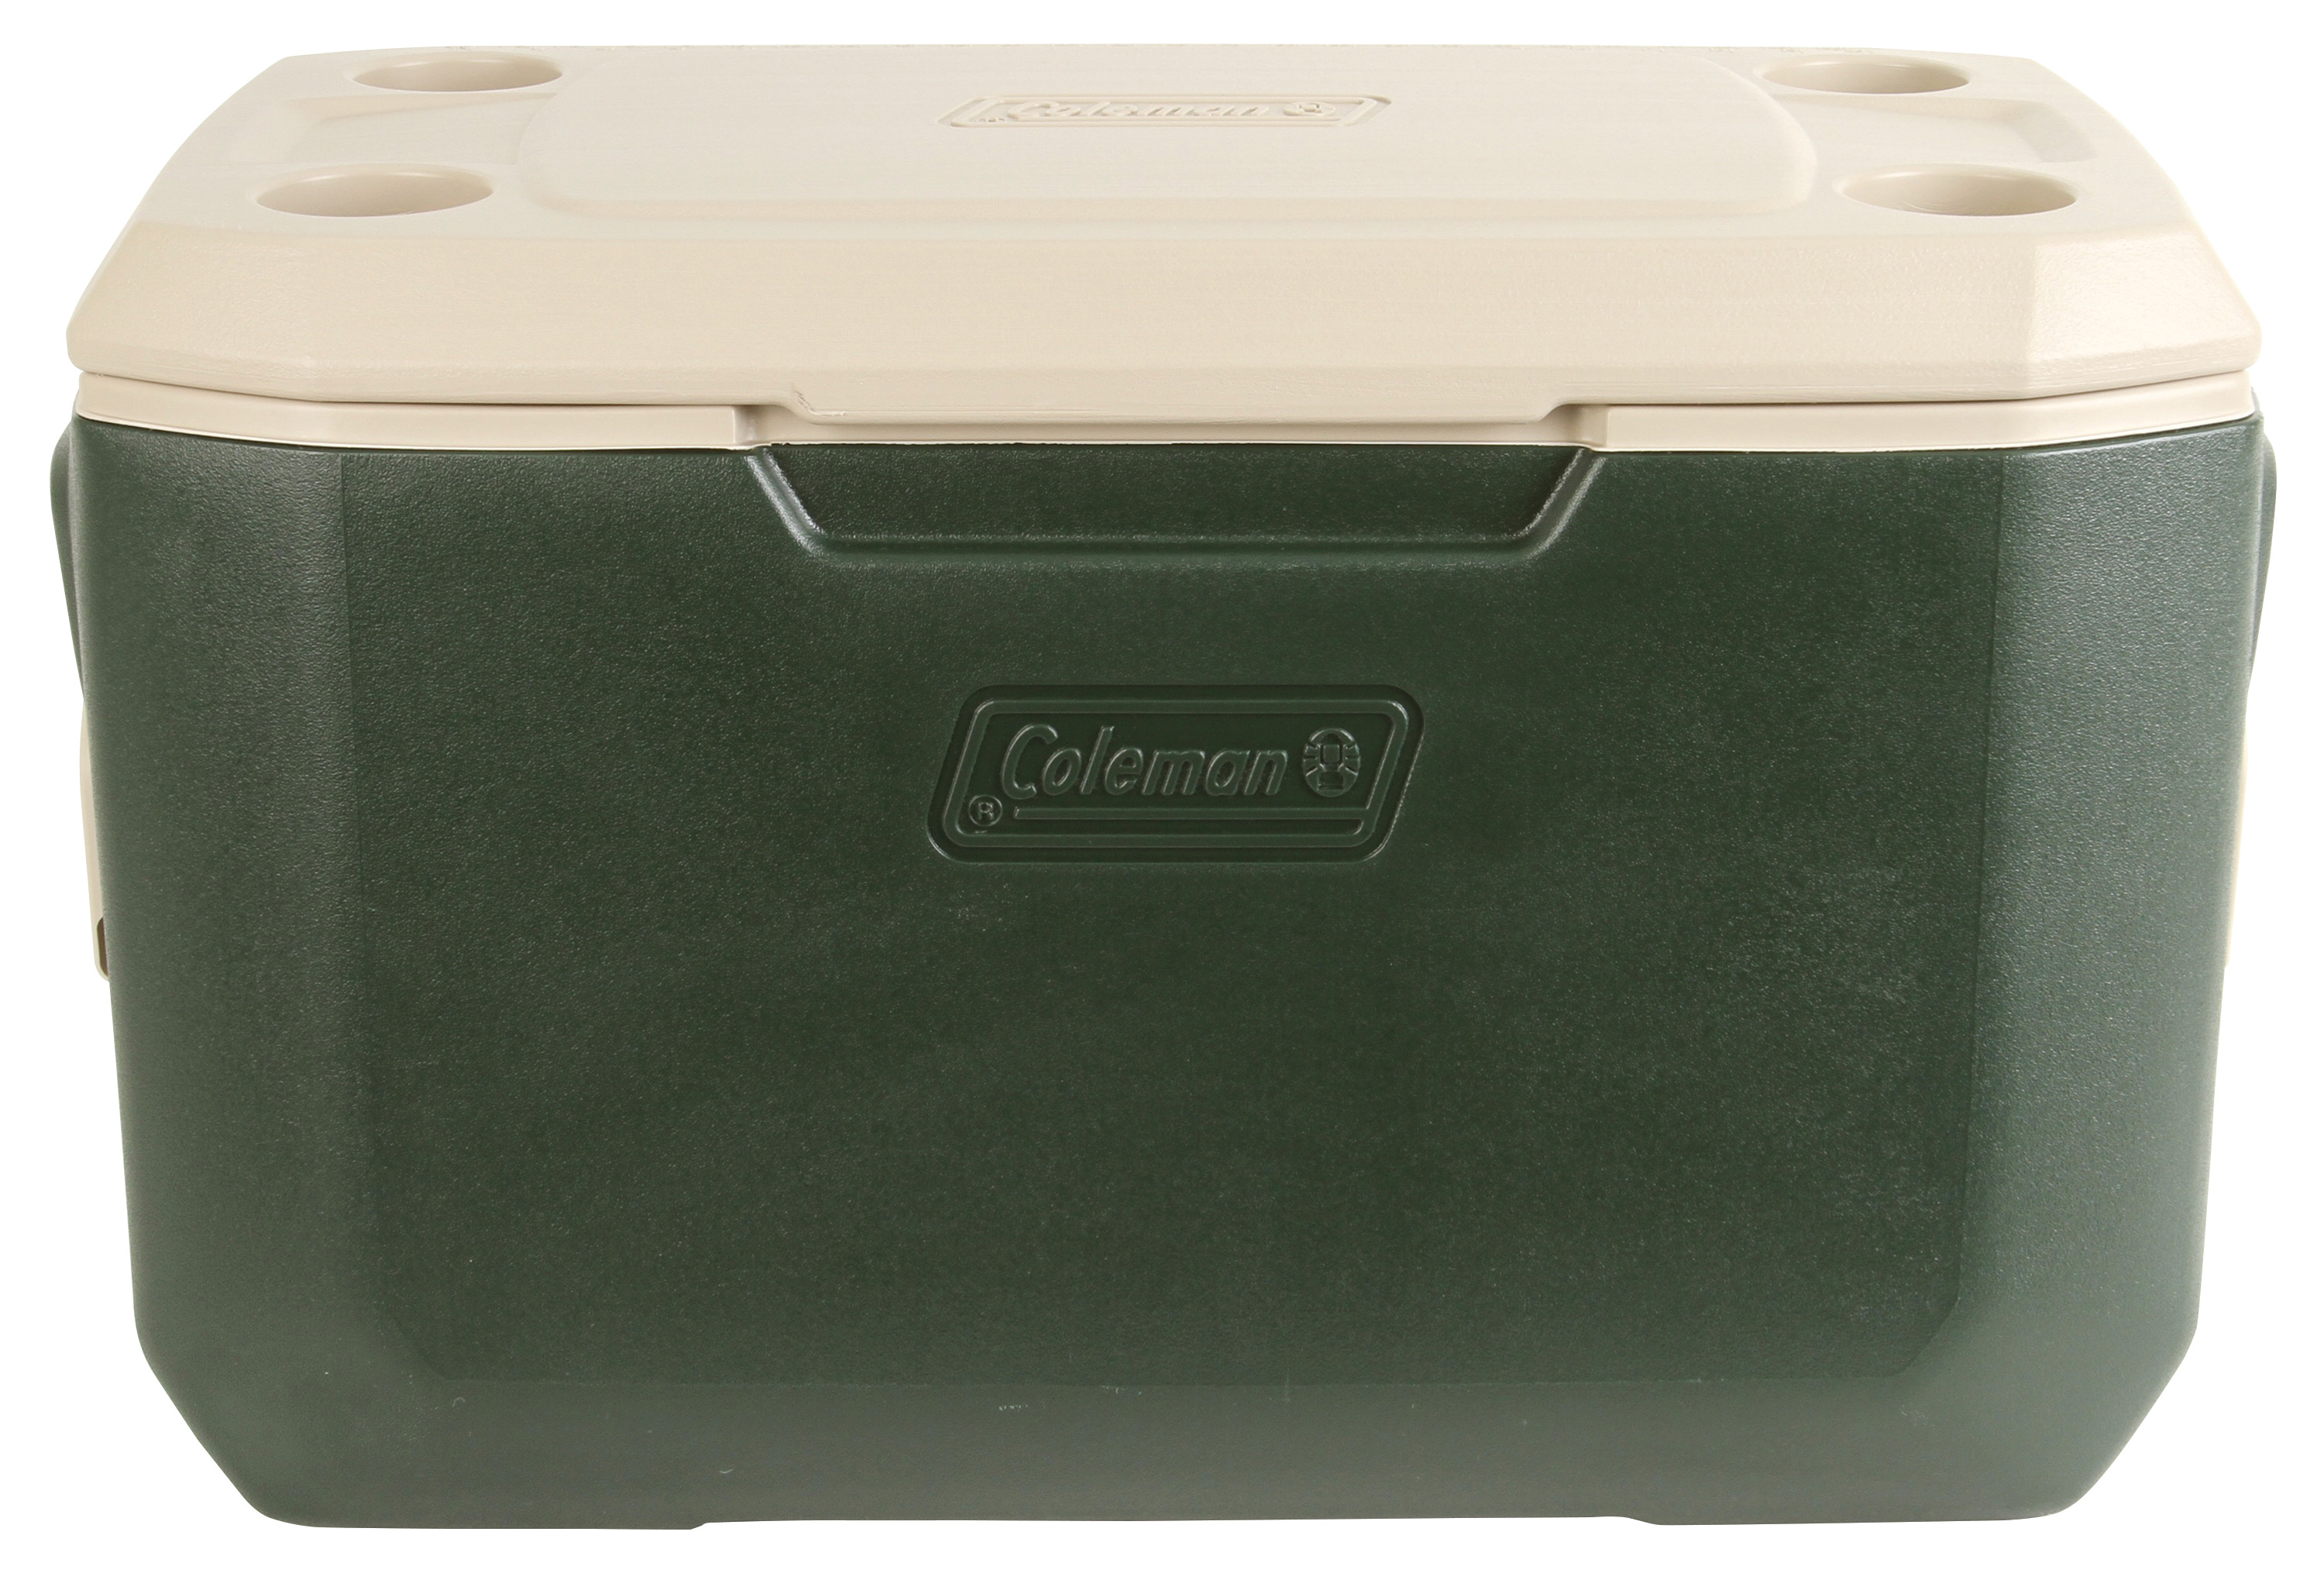 Coleman 70 Quart Xtreme 5 Day Heavy Duty Cooler, Green - image 5 of 6